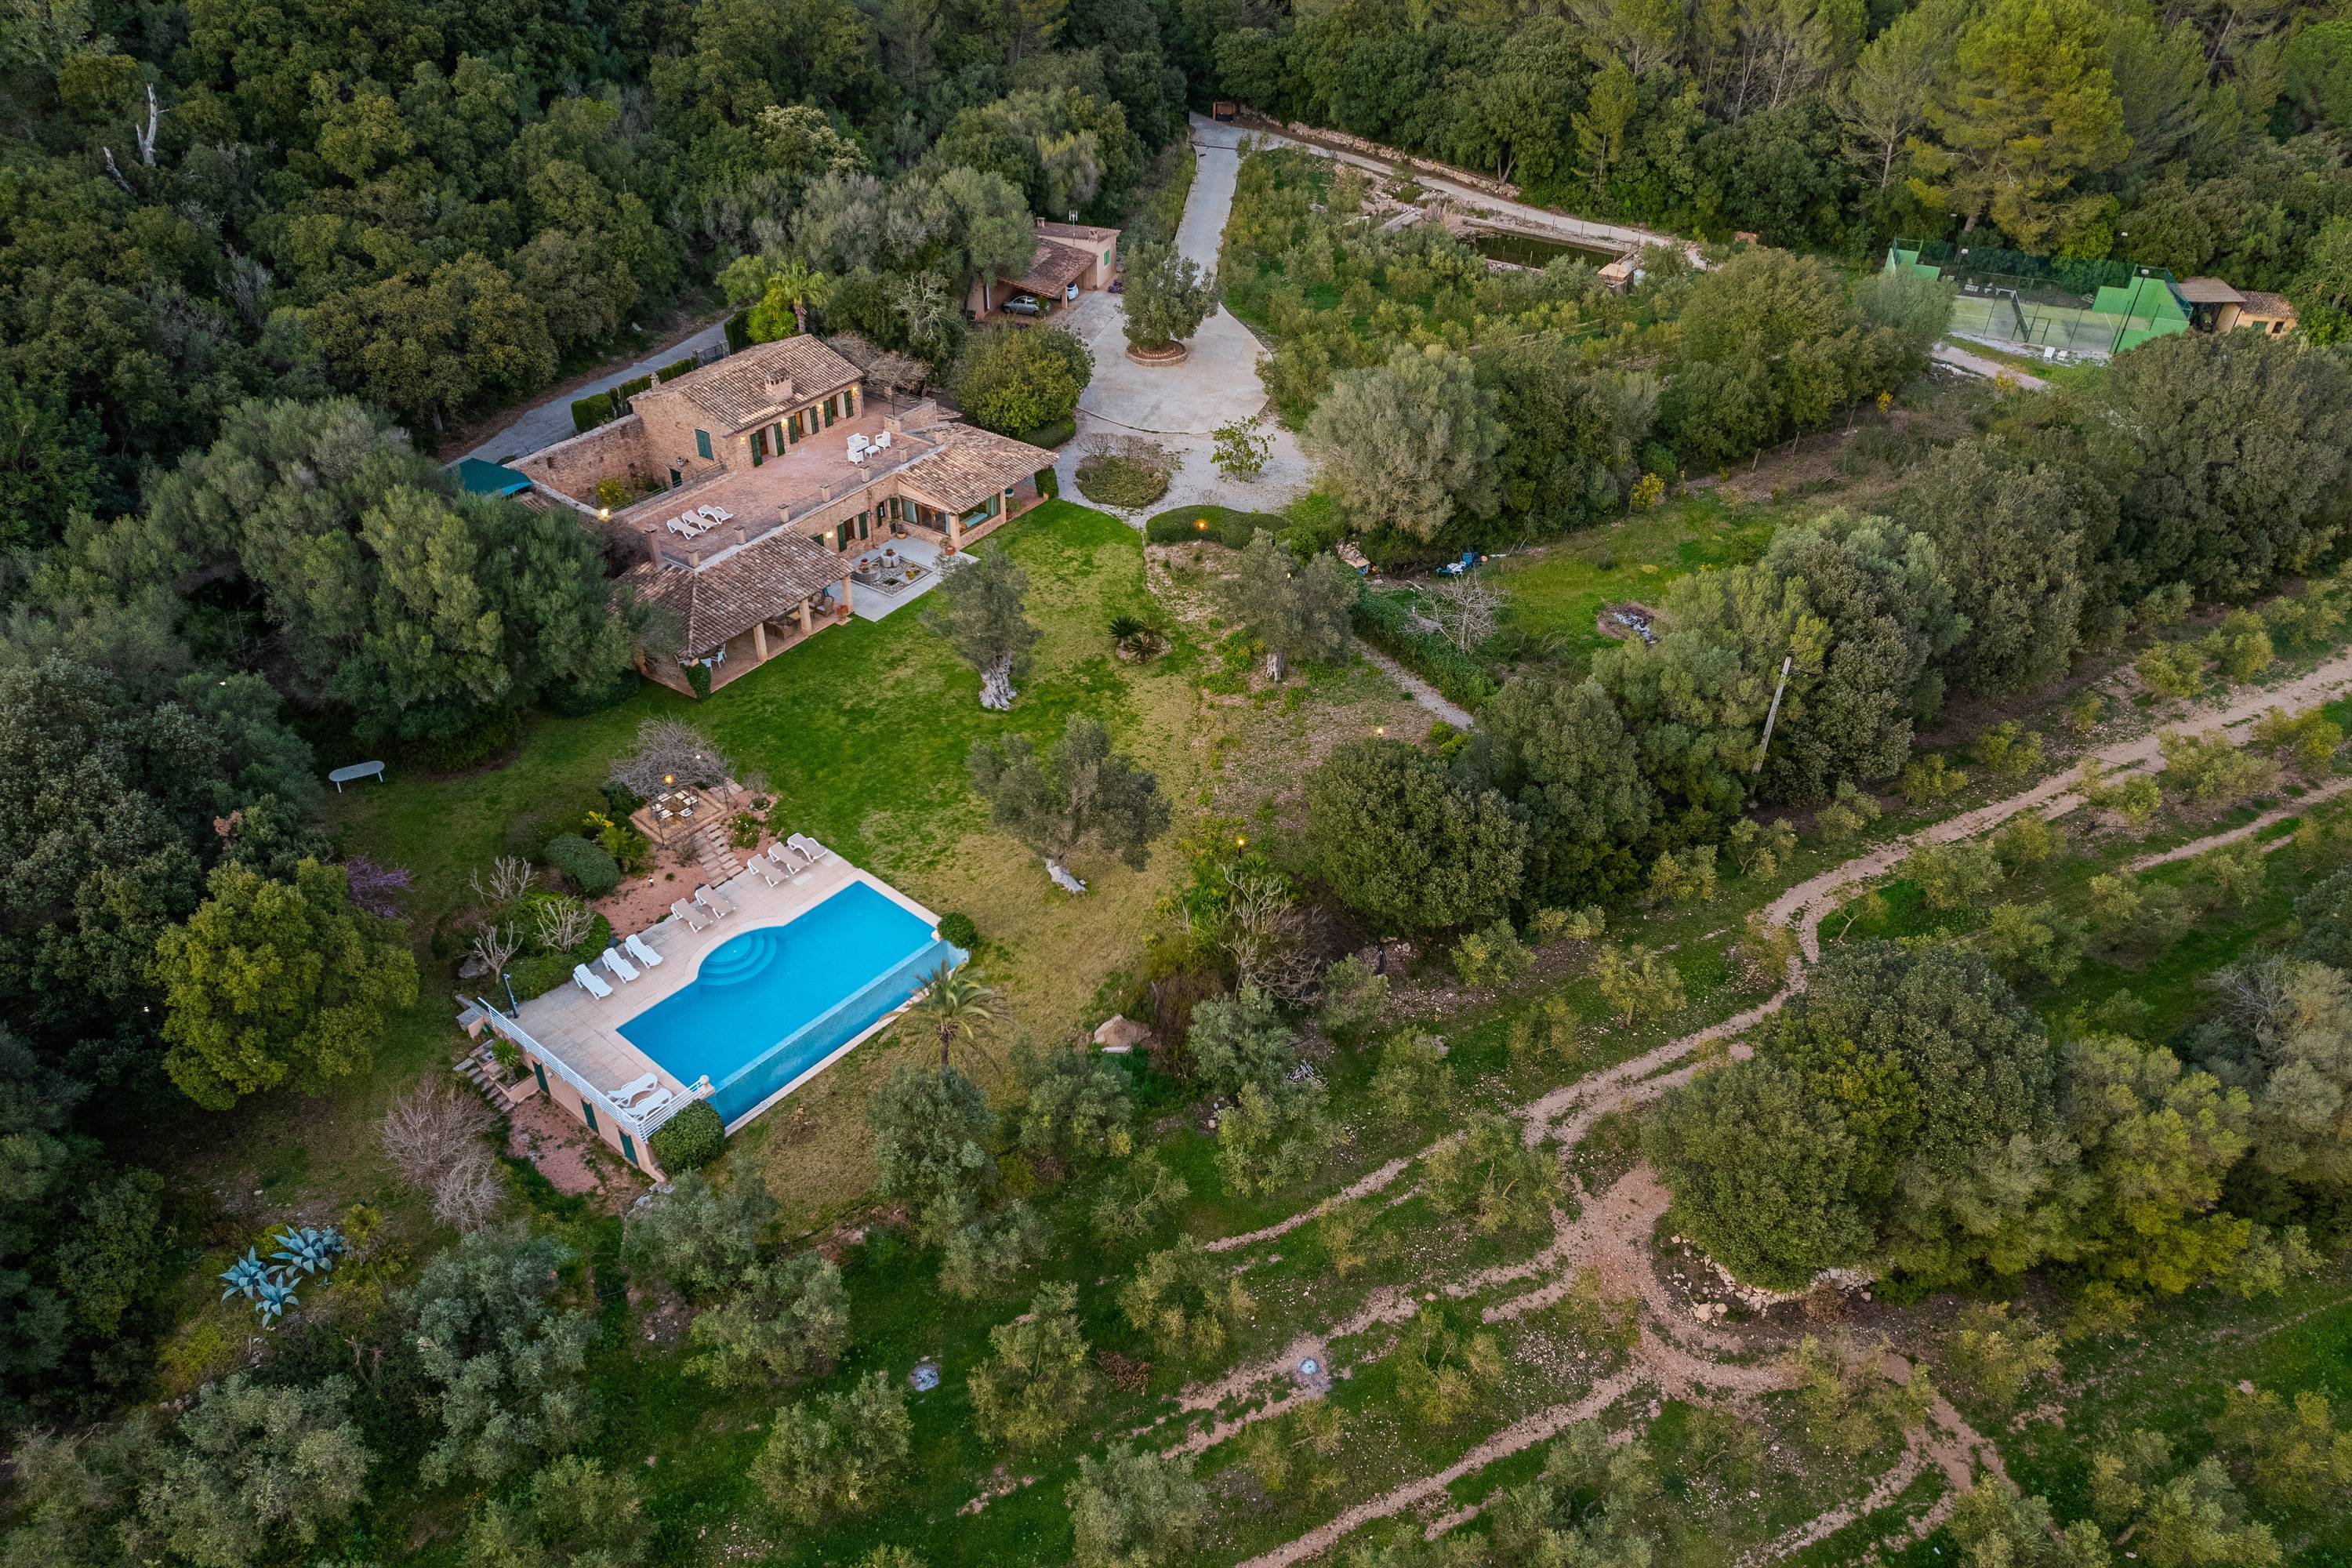 Exquisite Estate in the Heart of Mallorca: Tranquility, Luxury, and Breathtaking Views Await!